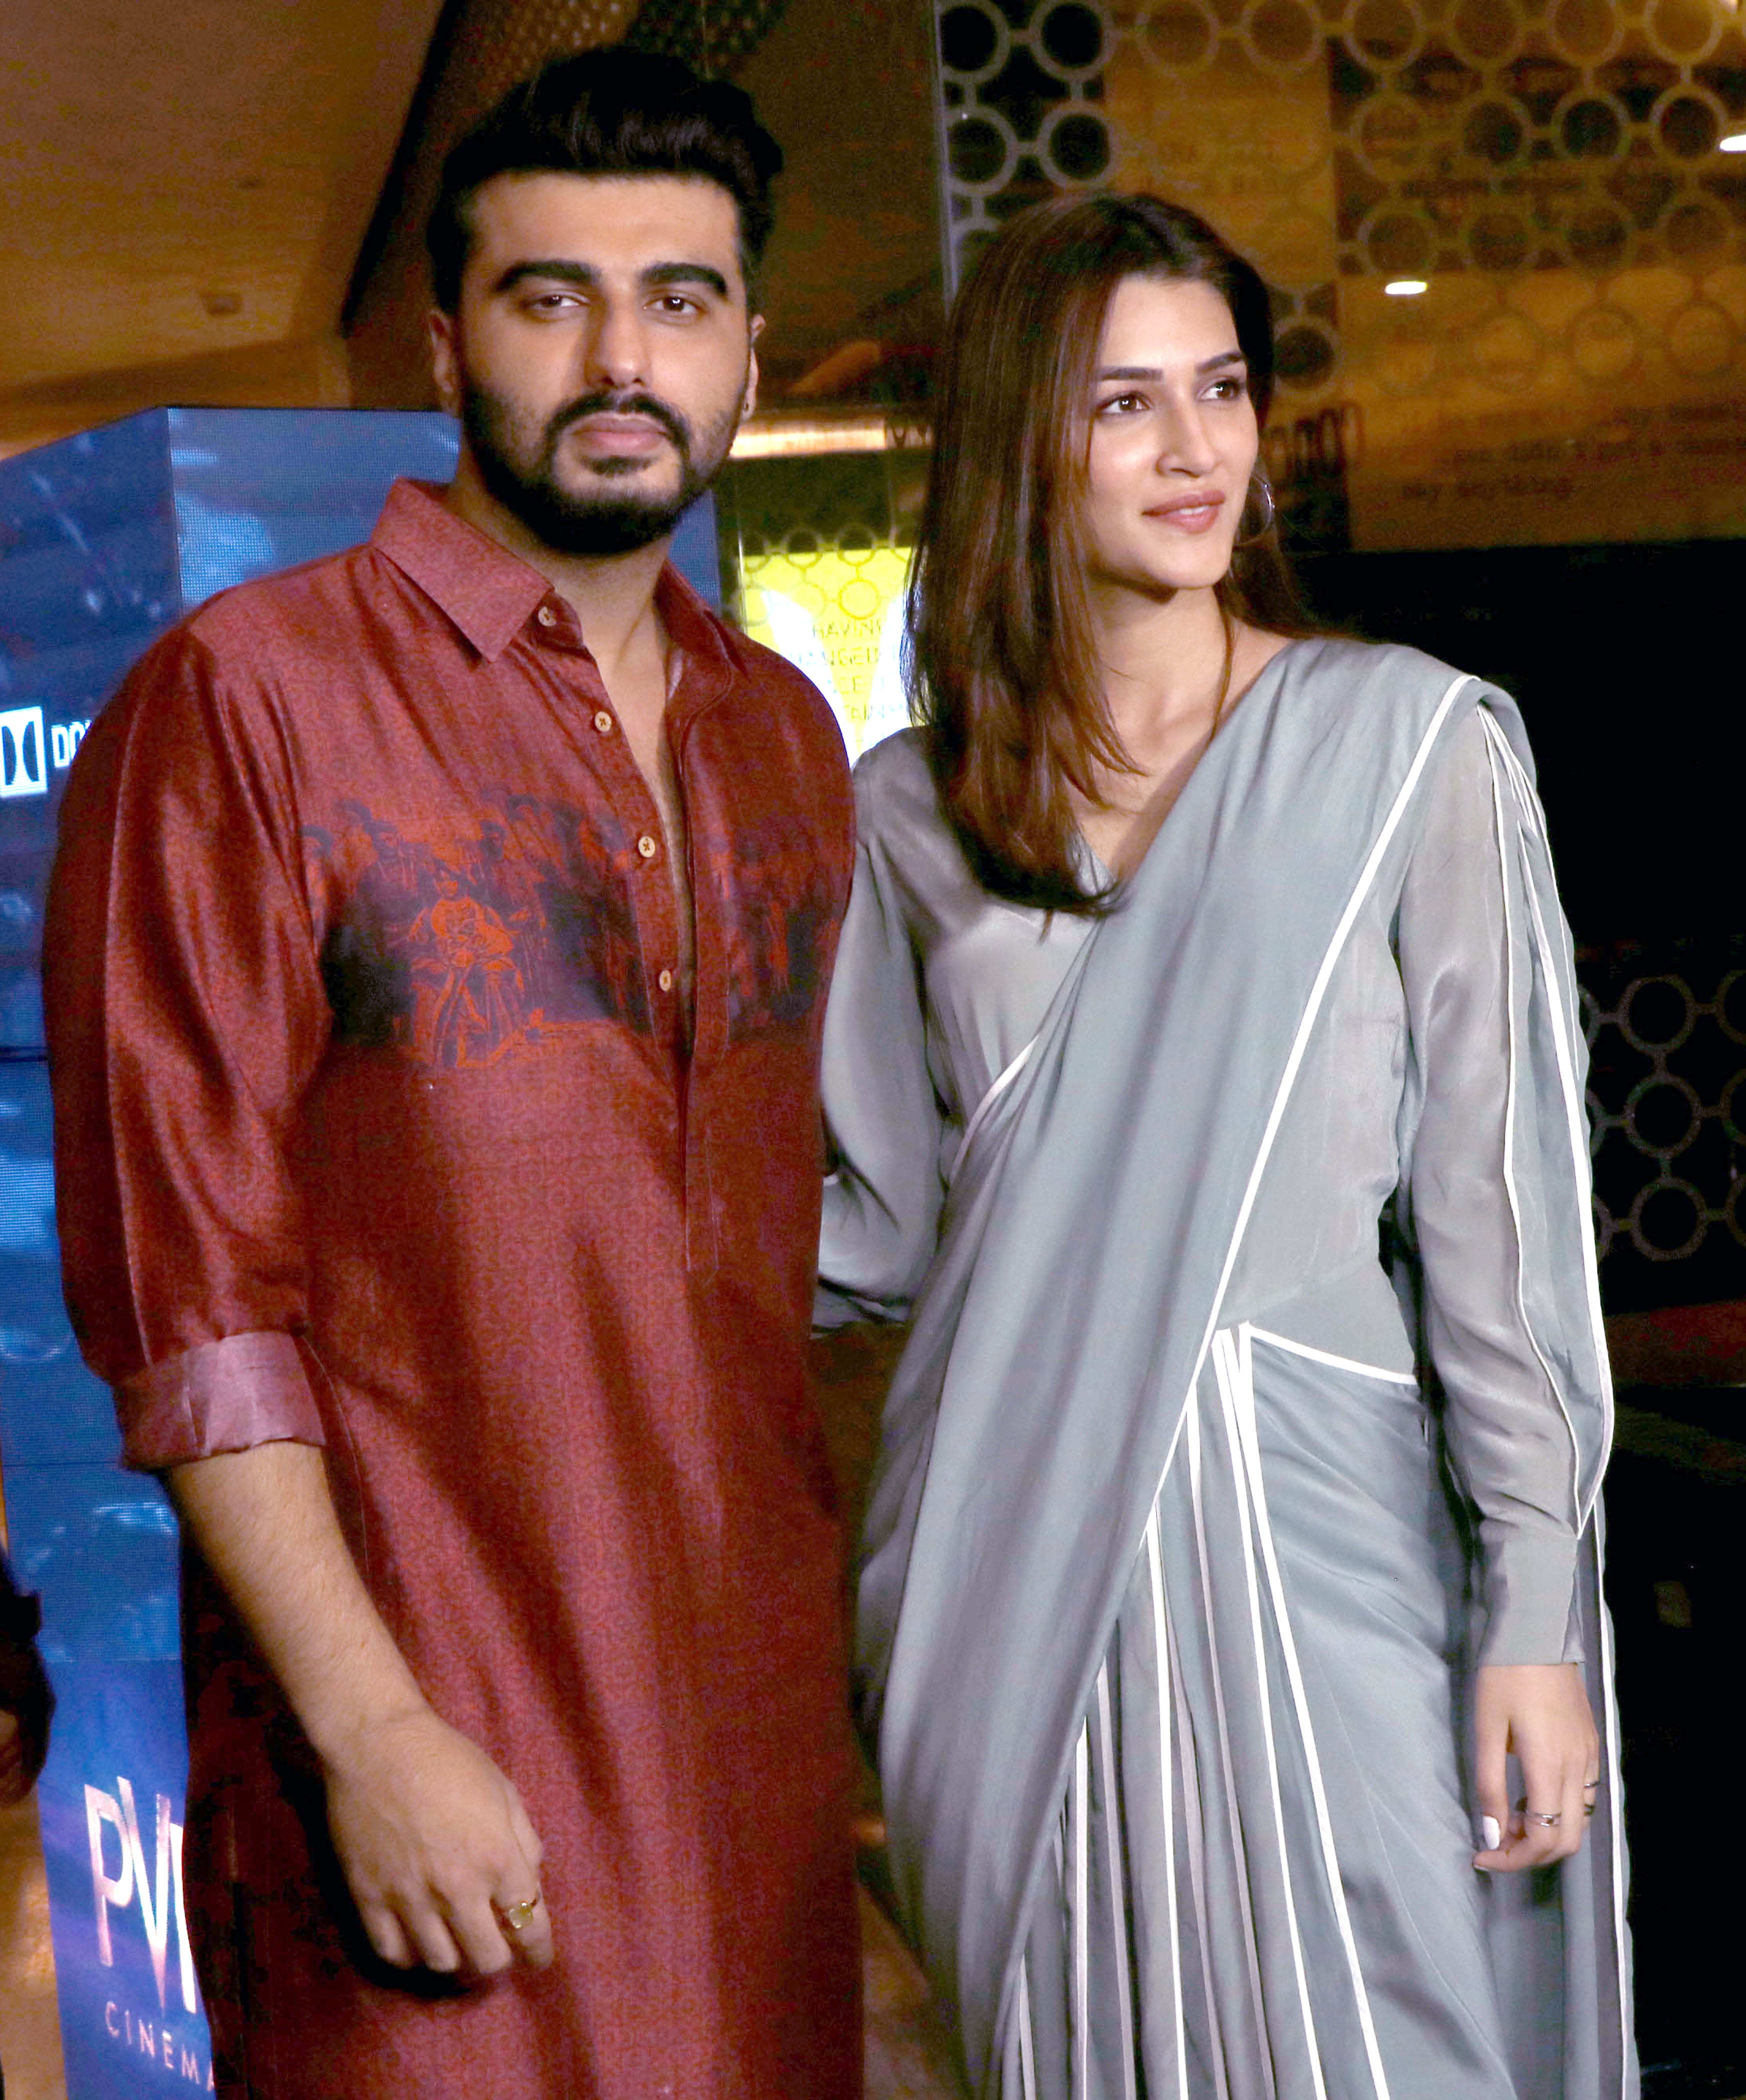 Mumbai : Bollywood actor Kriti Sanon and Arjun Kapoor during the meet & greet session with fans to promote their upcoming  film Panipat in Mumbai organized by Helo App for their users on Friday 6 December 2019 at PVR, City Mall, Andheri, Mumbai. Photo By Sachin Murdeshwar GPN